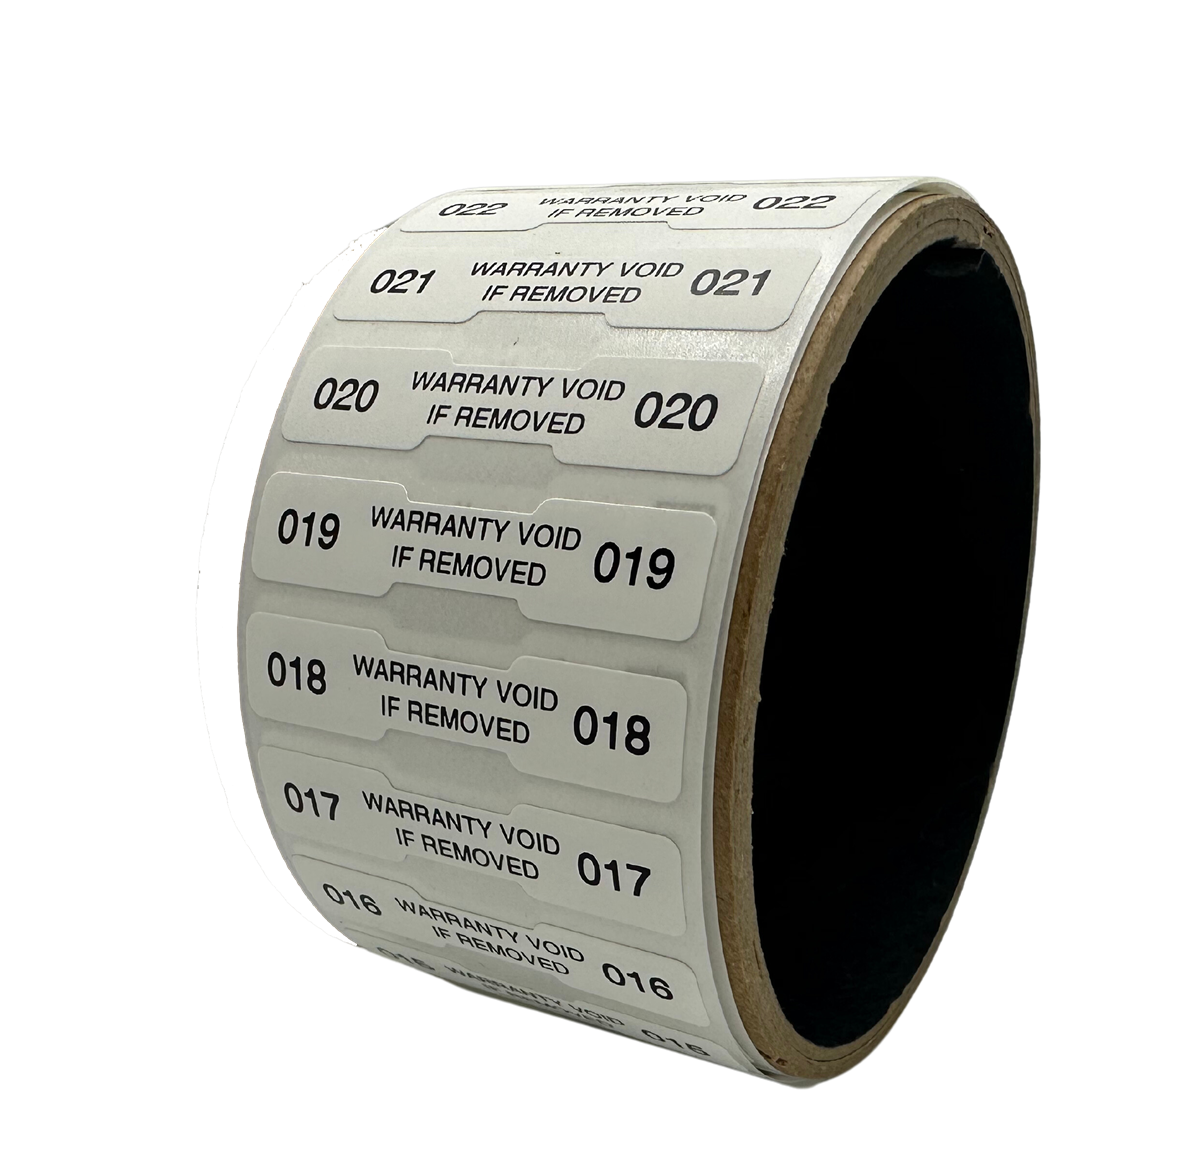 1,000 TamperVoidPro® White Tamper Evident Security Labels Seal Sticker, Dogbone Shape Size 1.75" x 0.375 (44mm x 9mm). Printed: Warranty Void if Label Removed + Serialization.